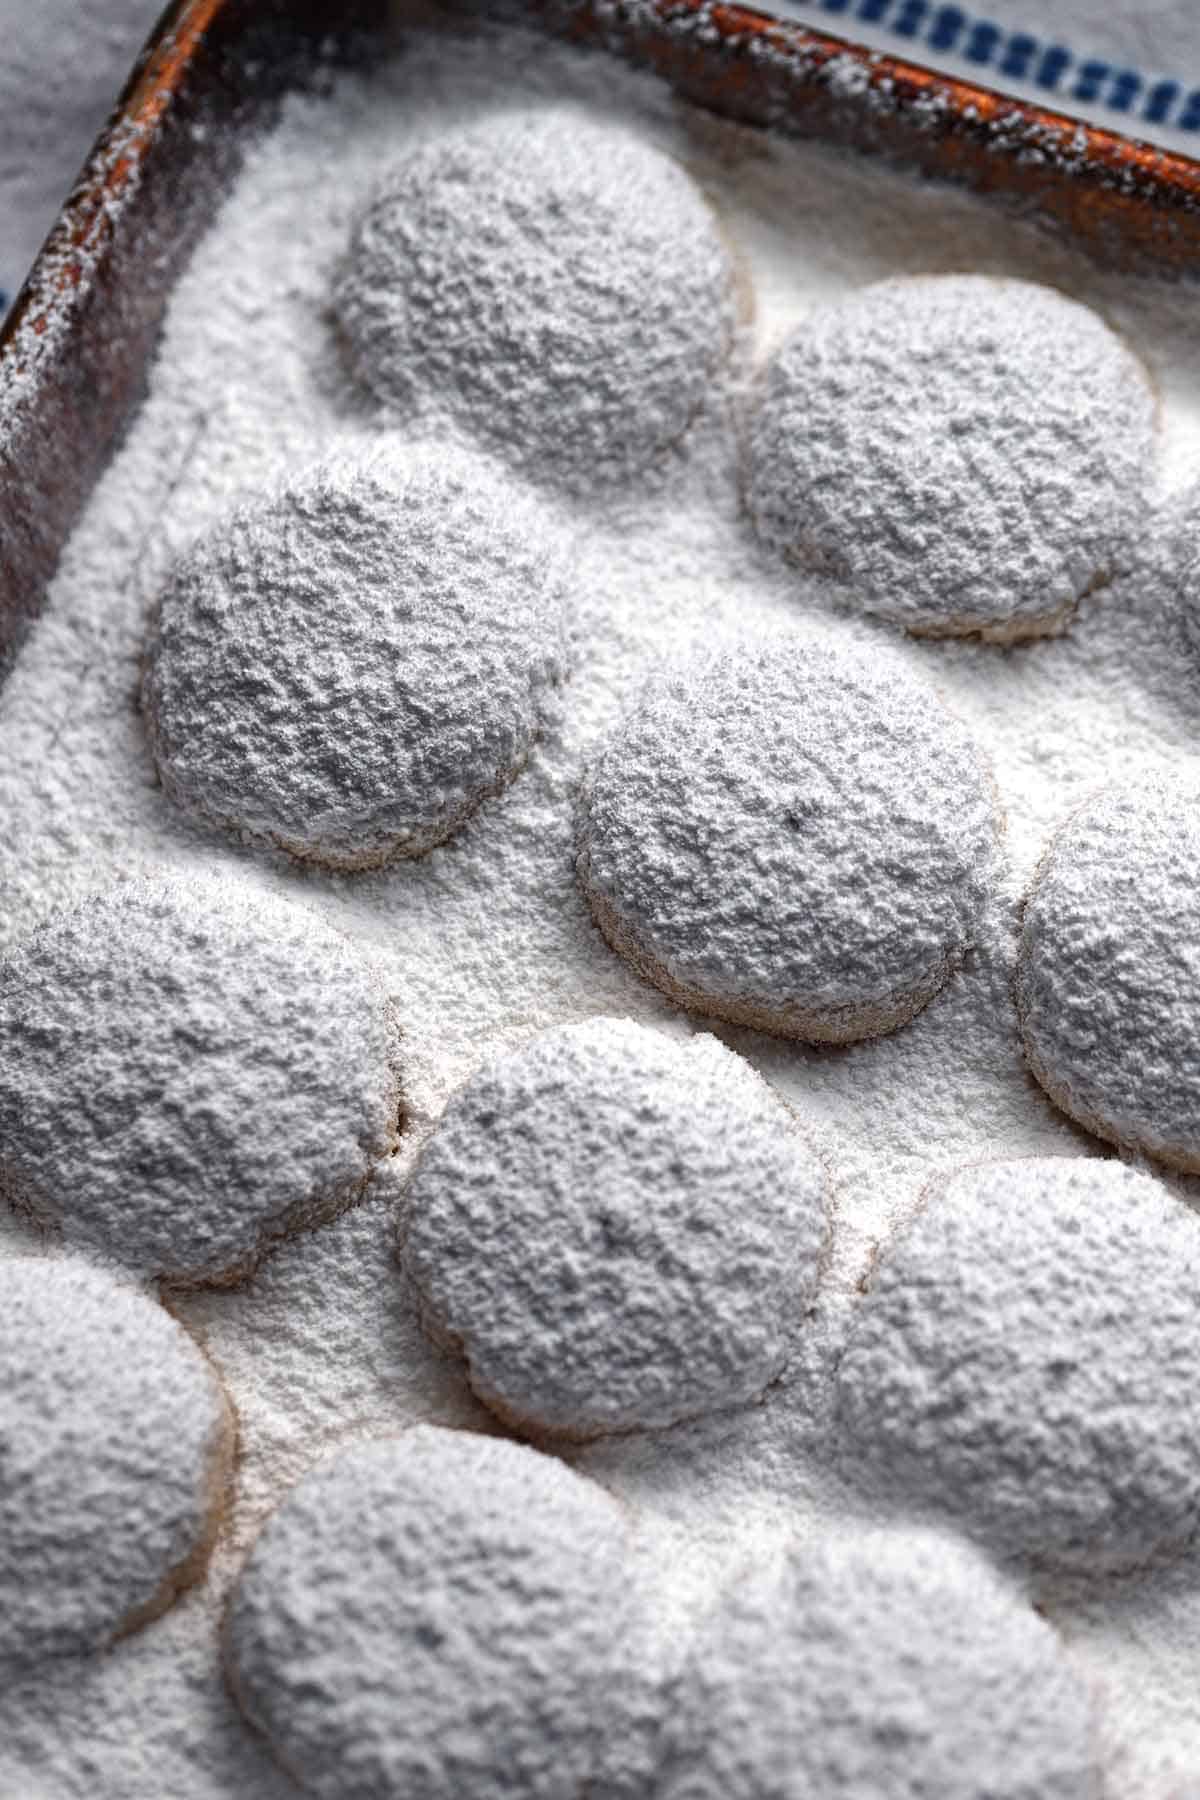 Kourambiedes on a cookie sheet coated in powdered sugar, cooling after baking.